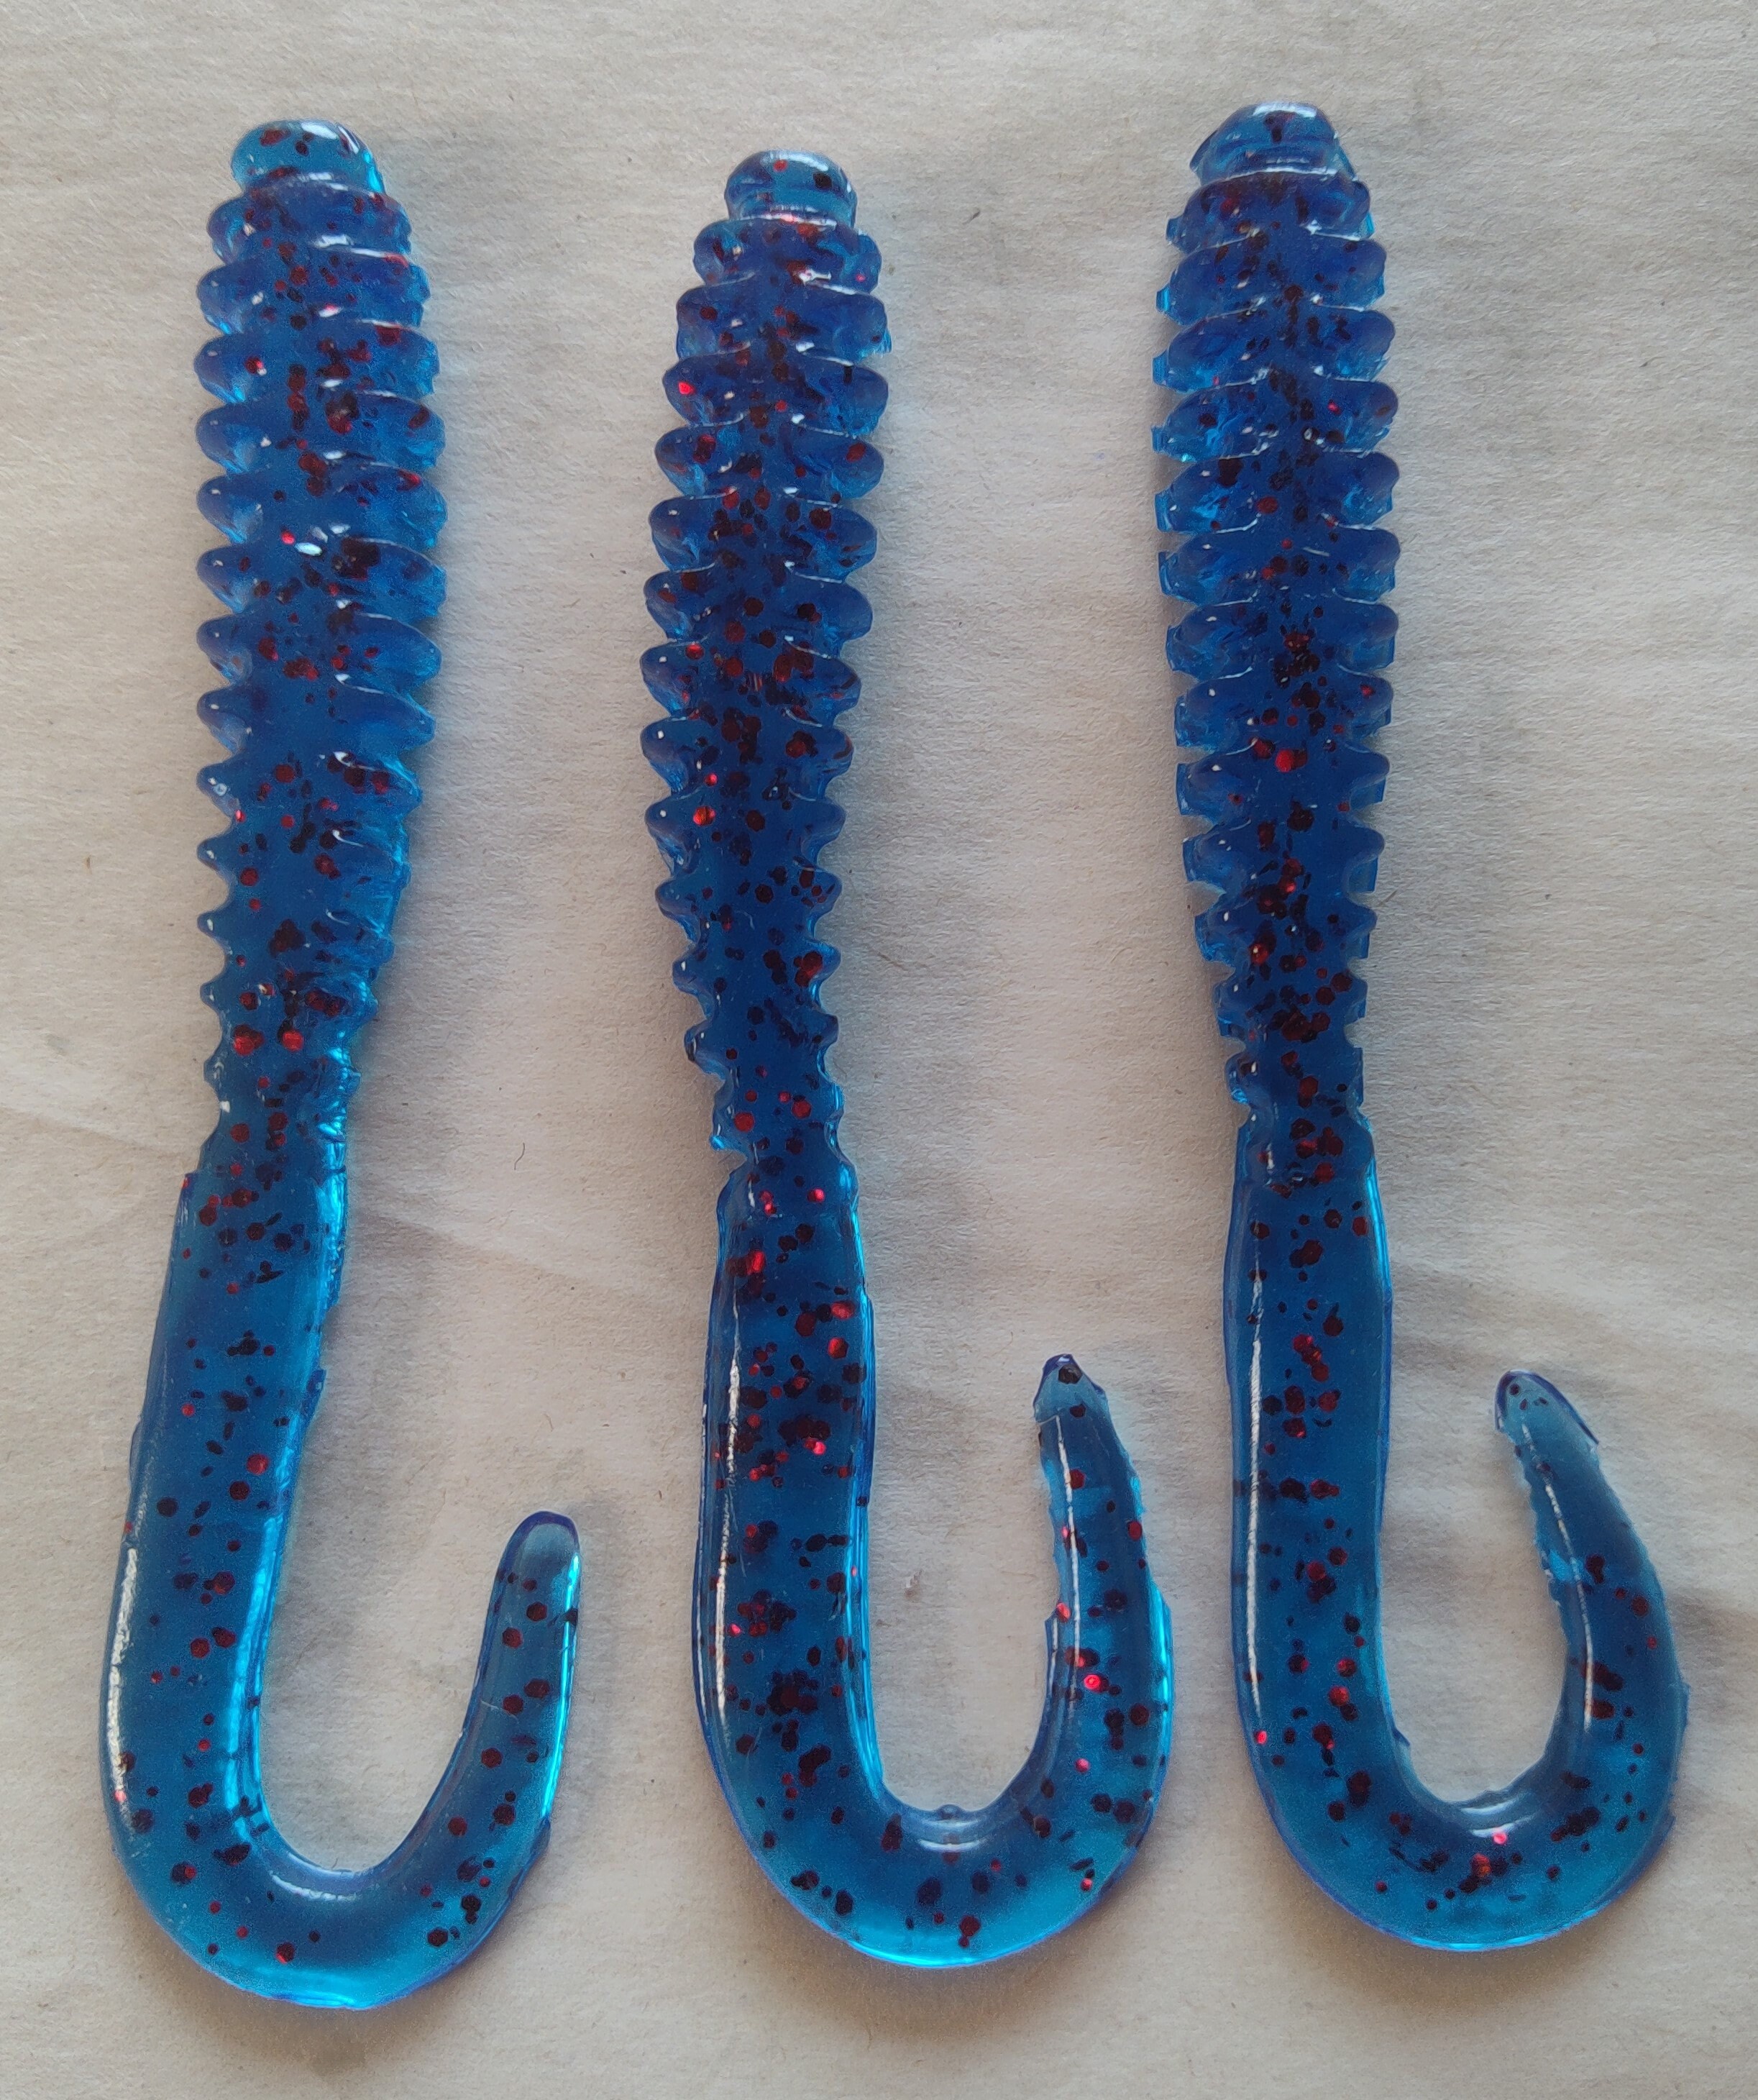 4 Curly Tail Grub in Our Ocean Blue Color. 